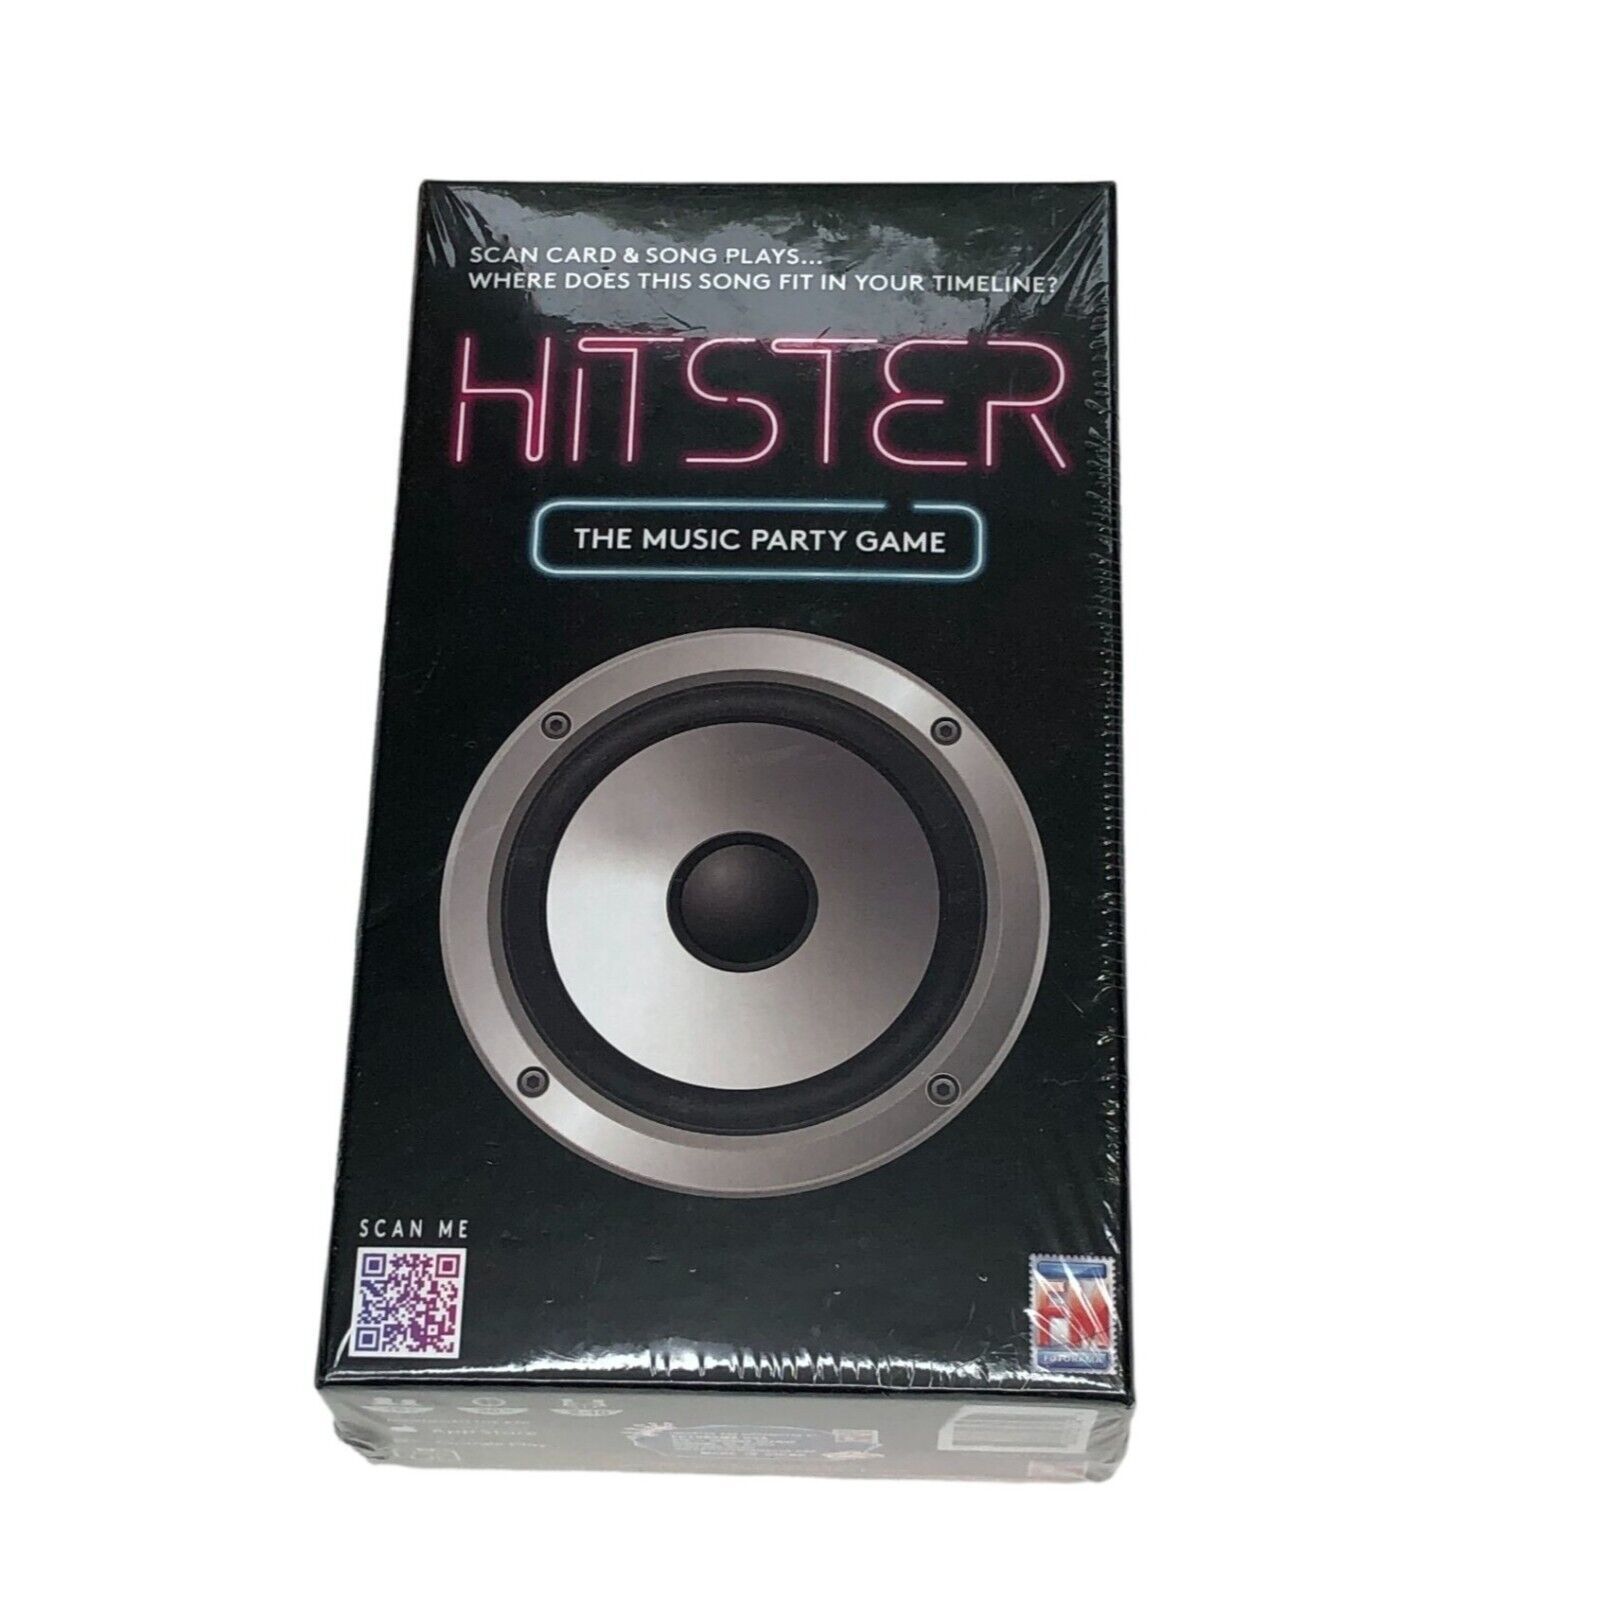 Primary image for Hitster The Music Party Game Trivia Scan QR Codes w App New Sealed Cards